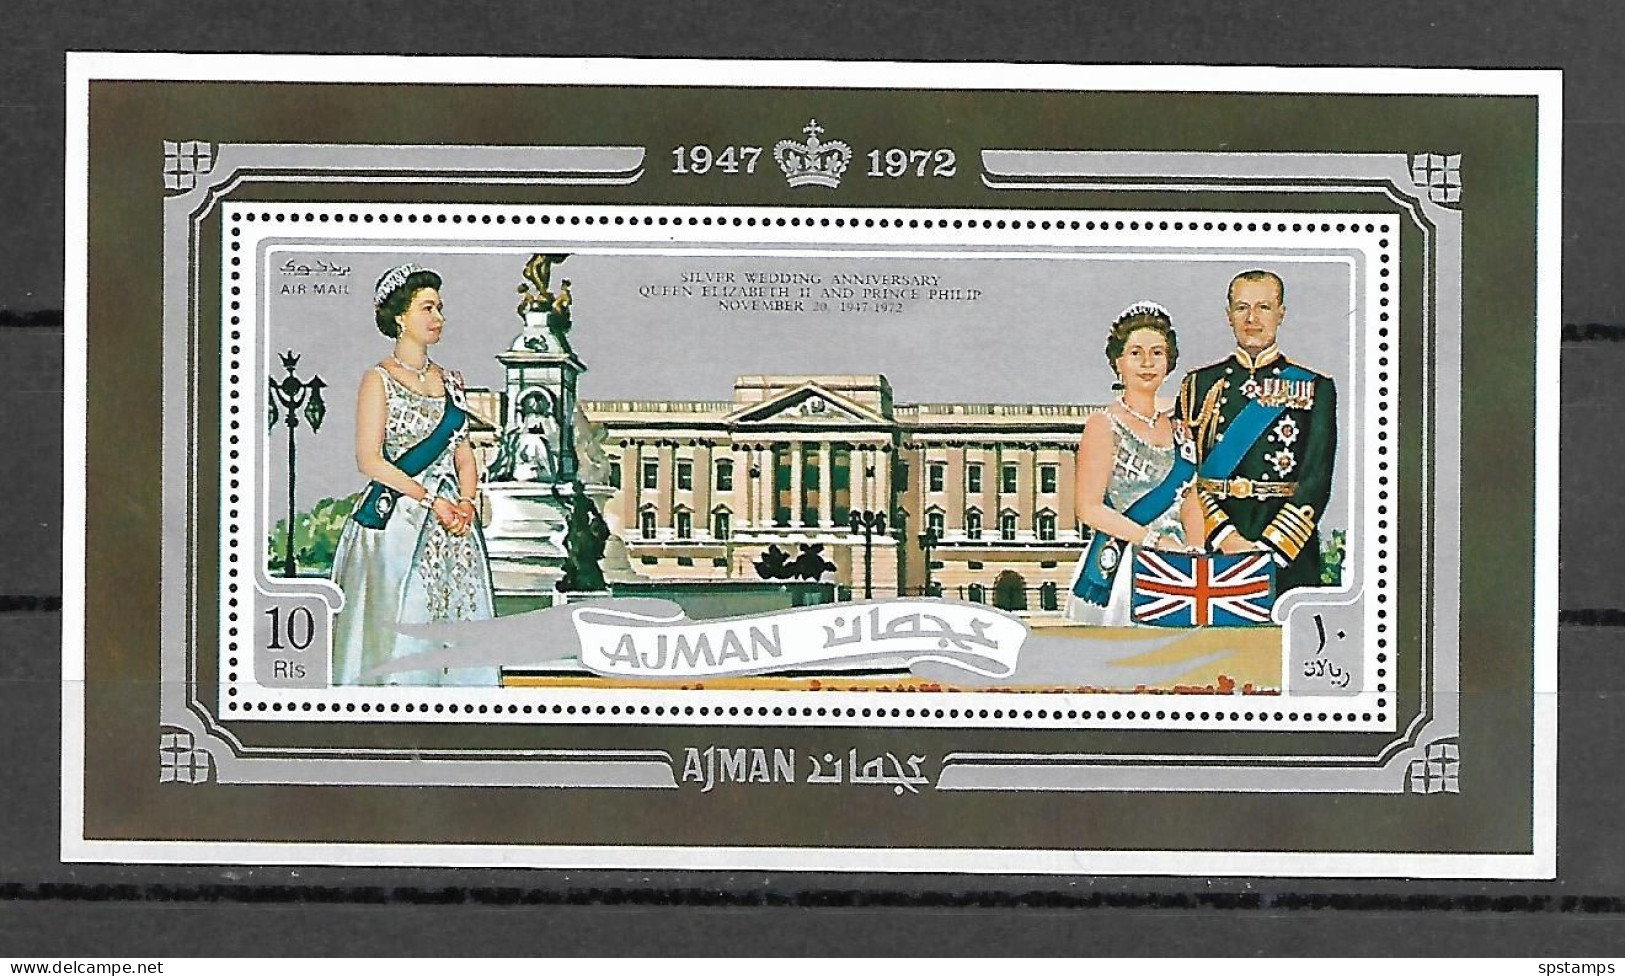 Ajman 1971 The 25th Wedding Anniversary Of Queen Elizabeth II And Prince Philip MS MNH - Familles Royales